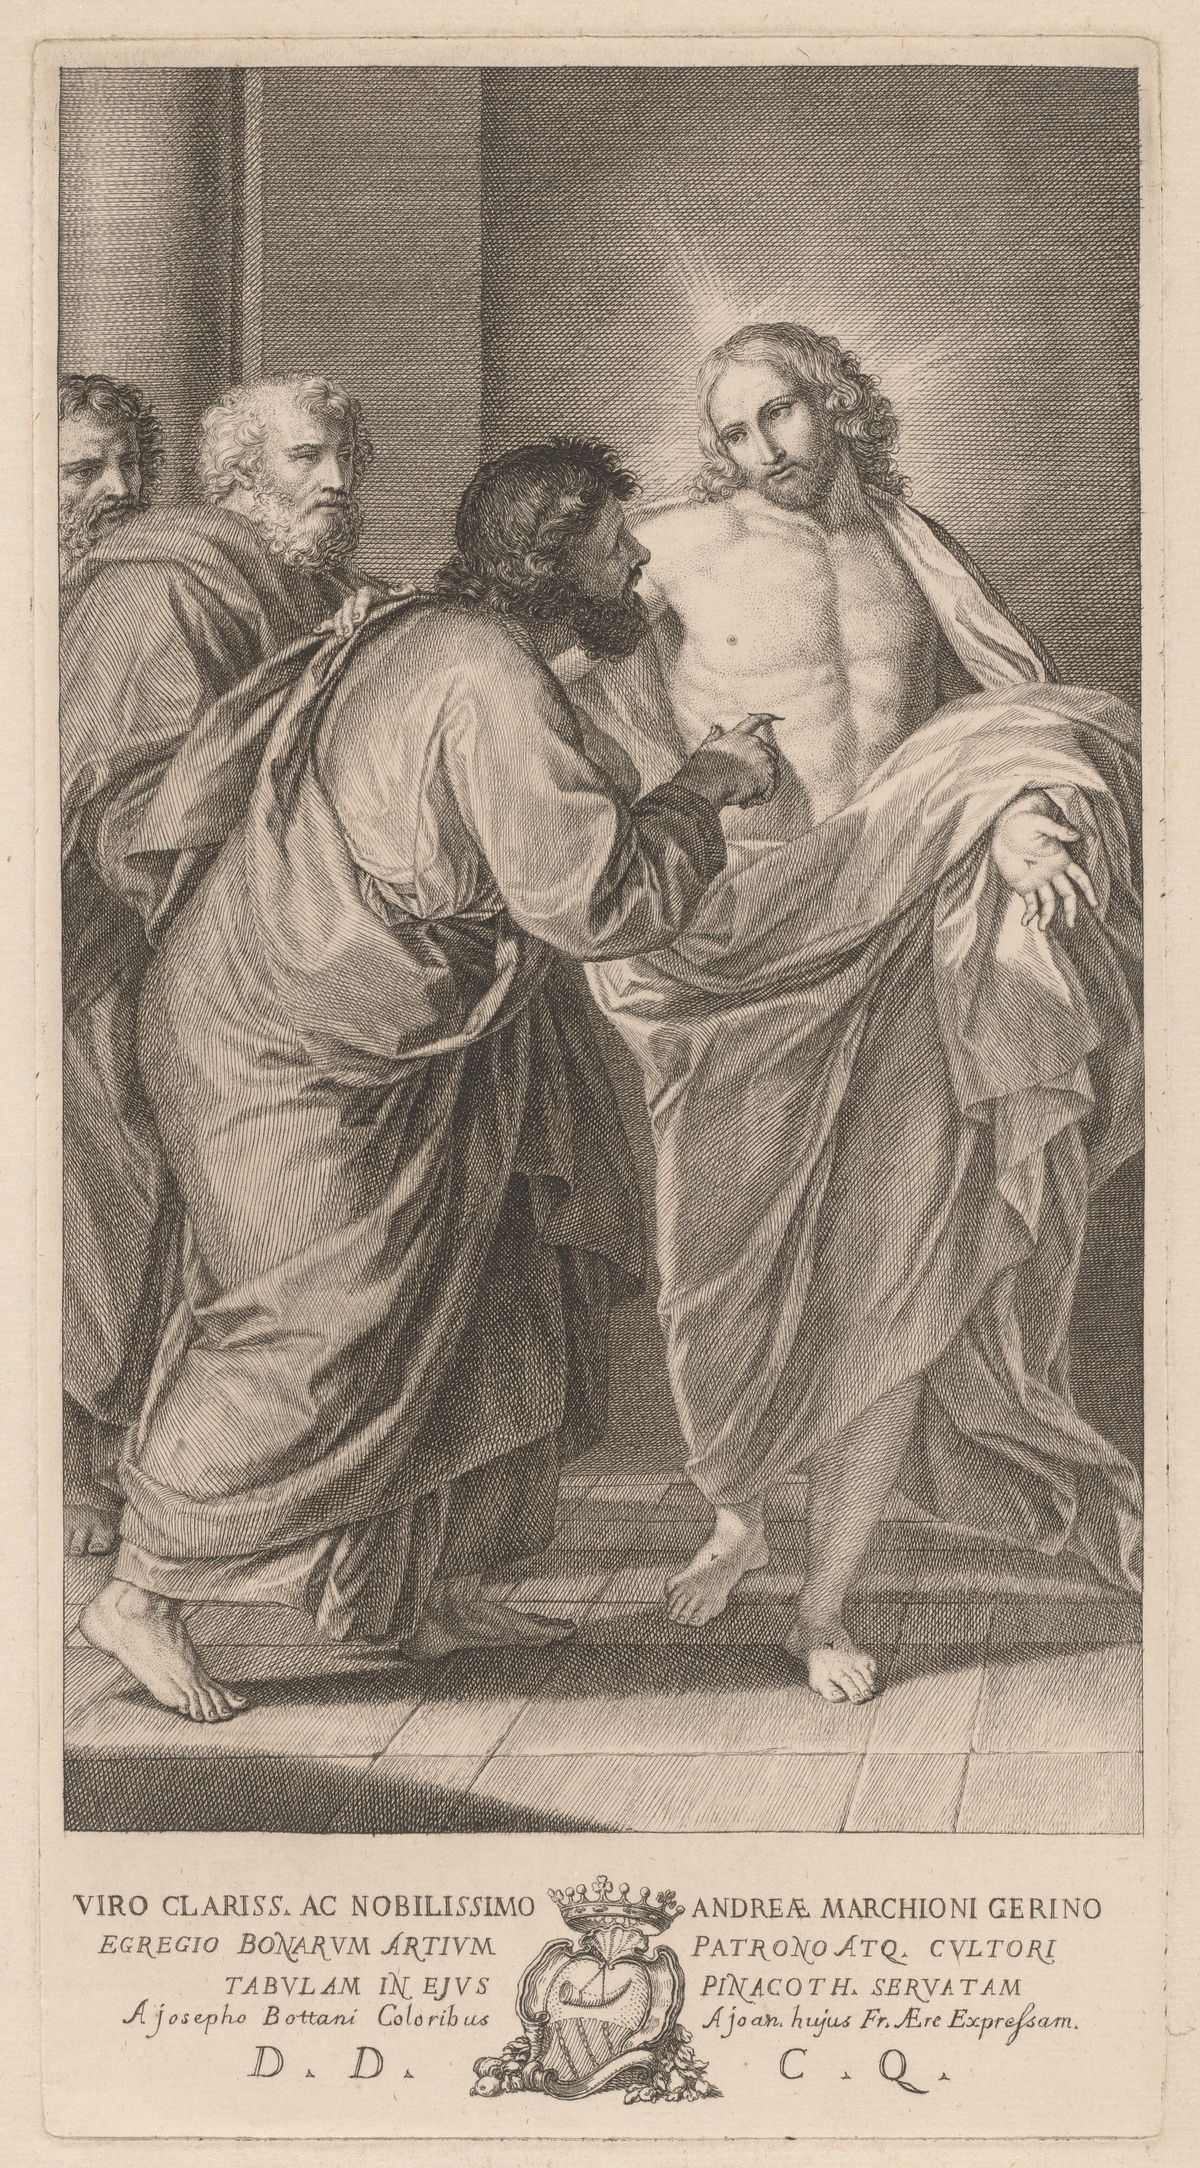 The Incredulity of Saint Thomas by Giovanni Bottani (mid 18th century) - Public Domain Bible Drawing